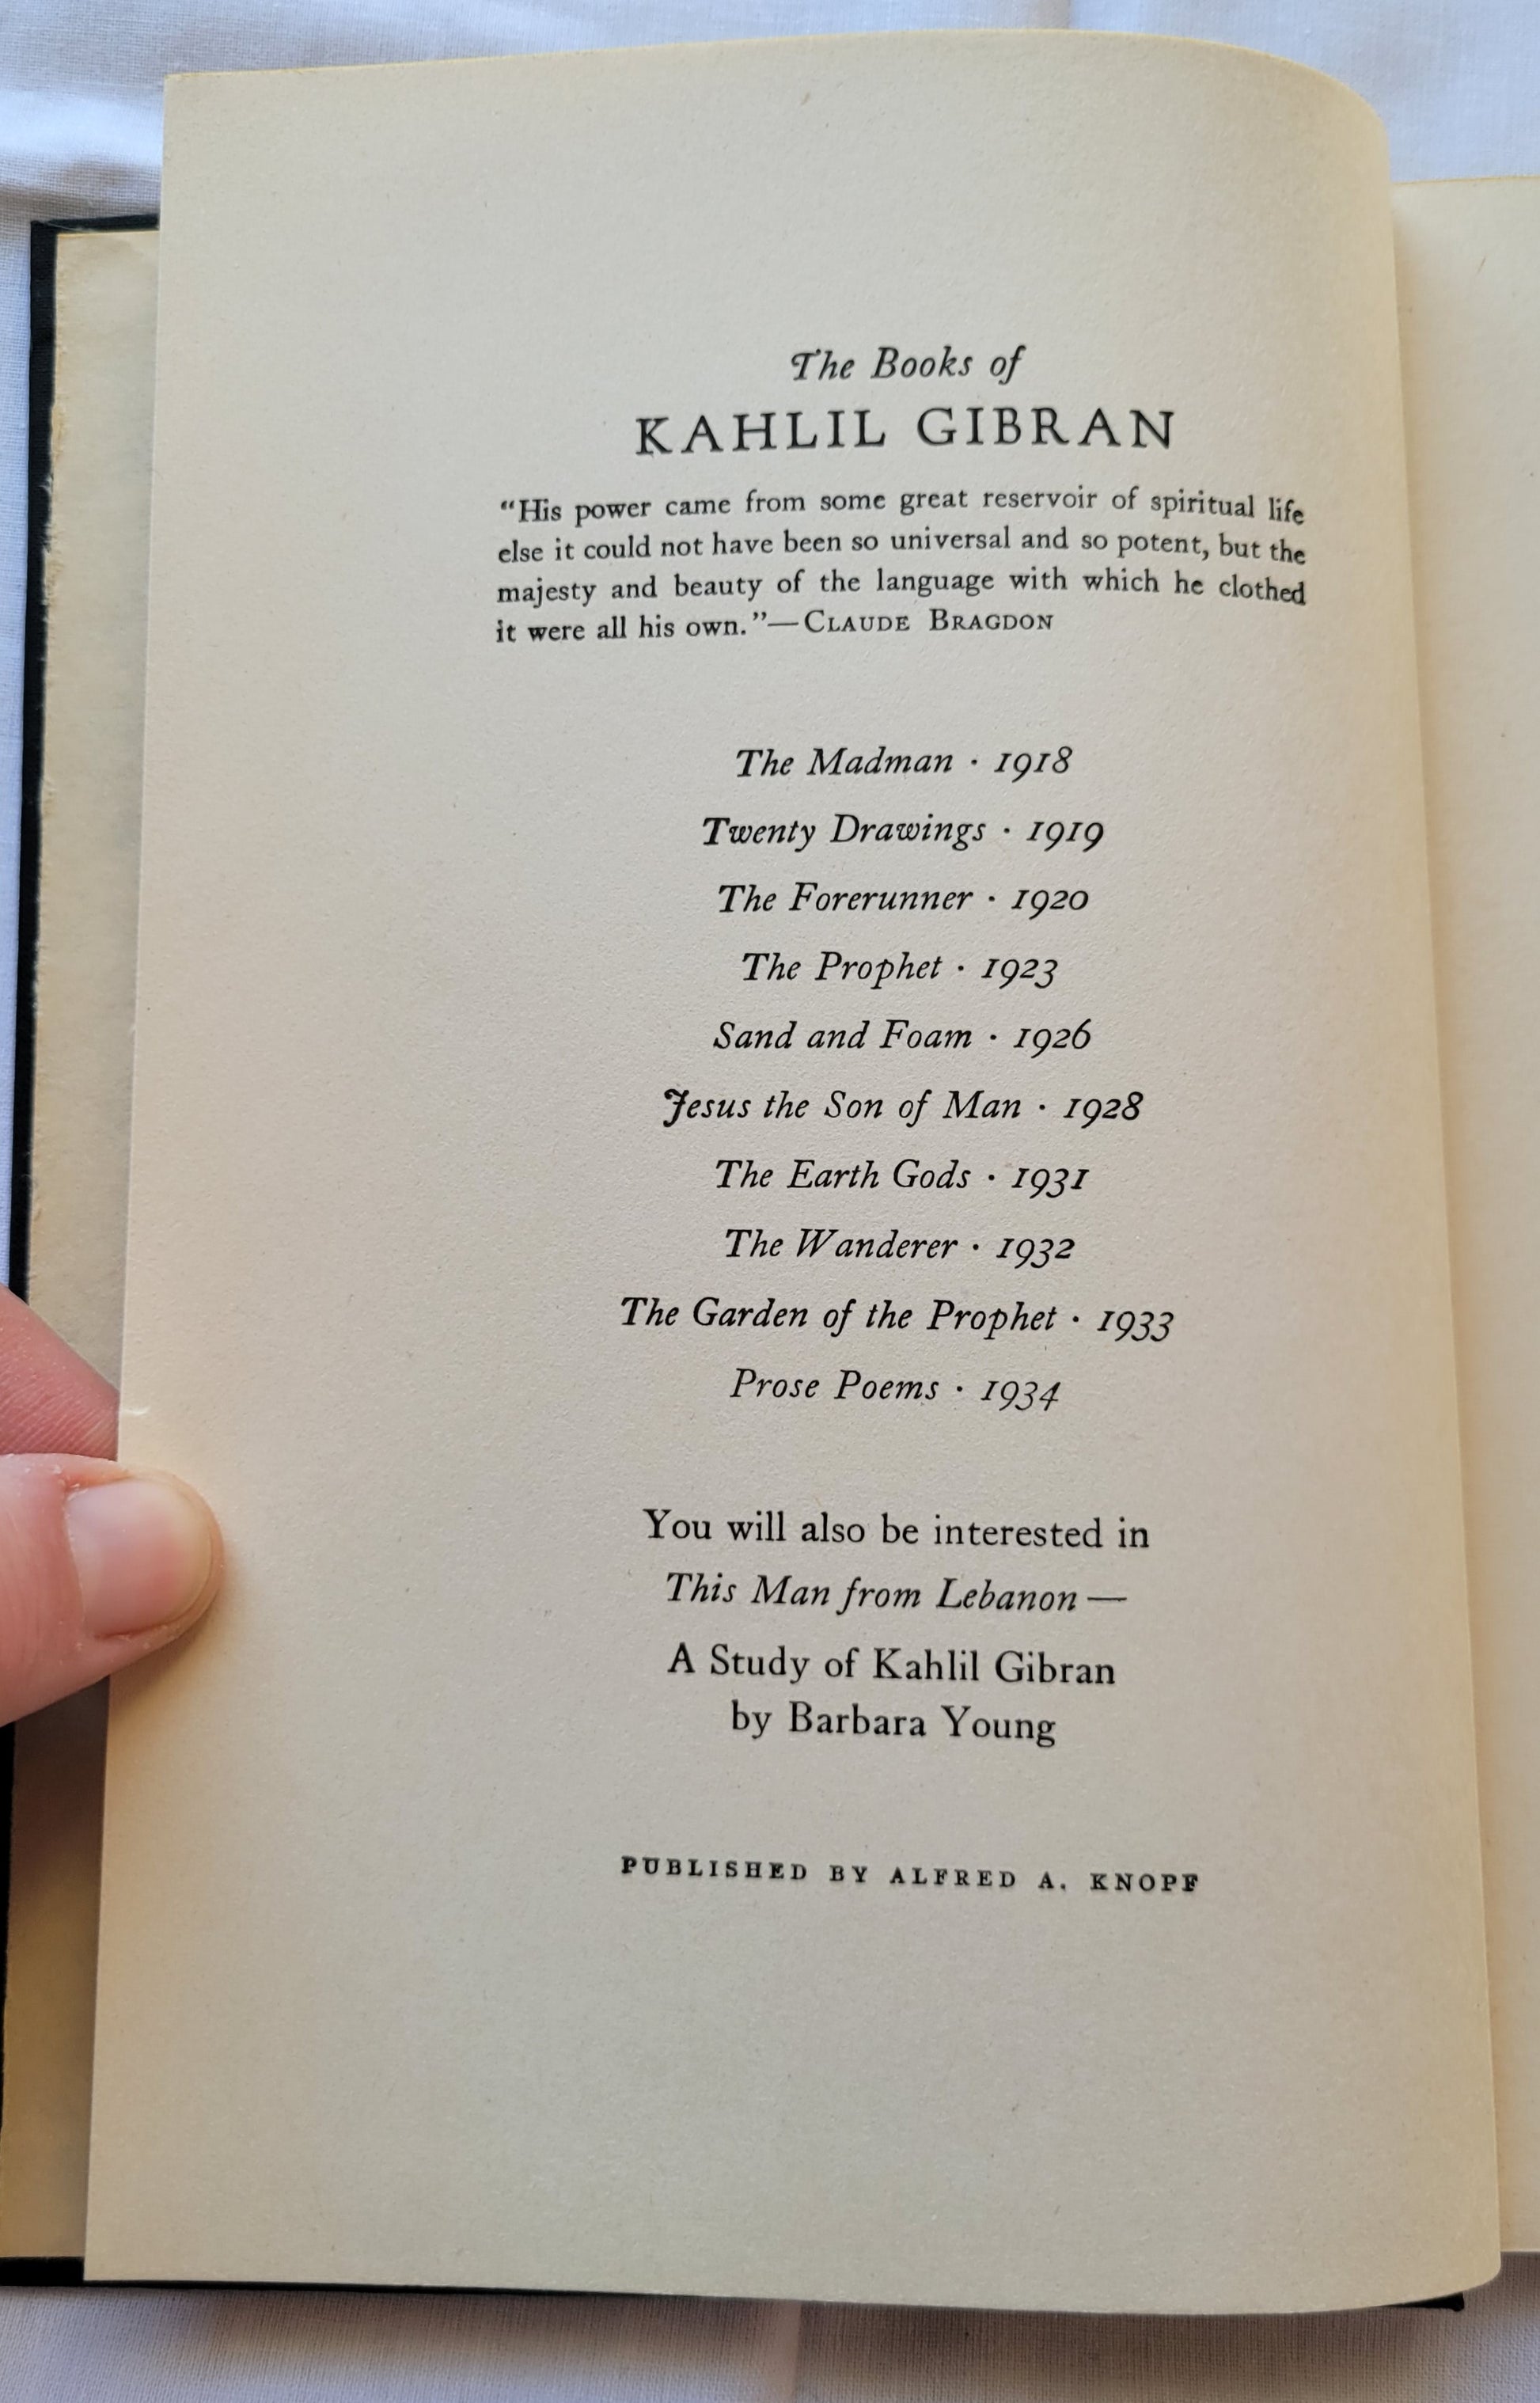 Vintage book for sale “The Garden of the Prophet” by Kahlil Gibran, published by Alfred A. Knoff. Author info.